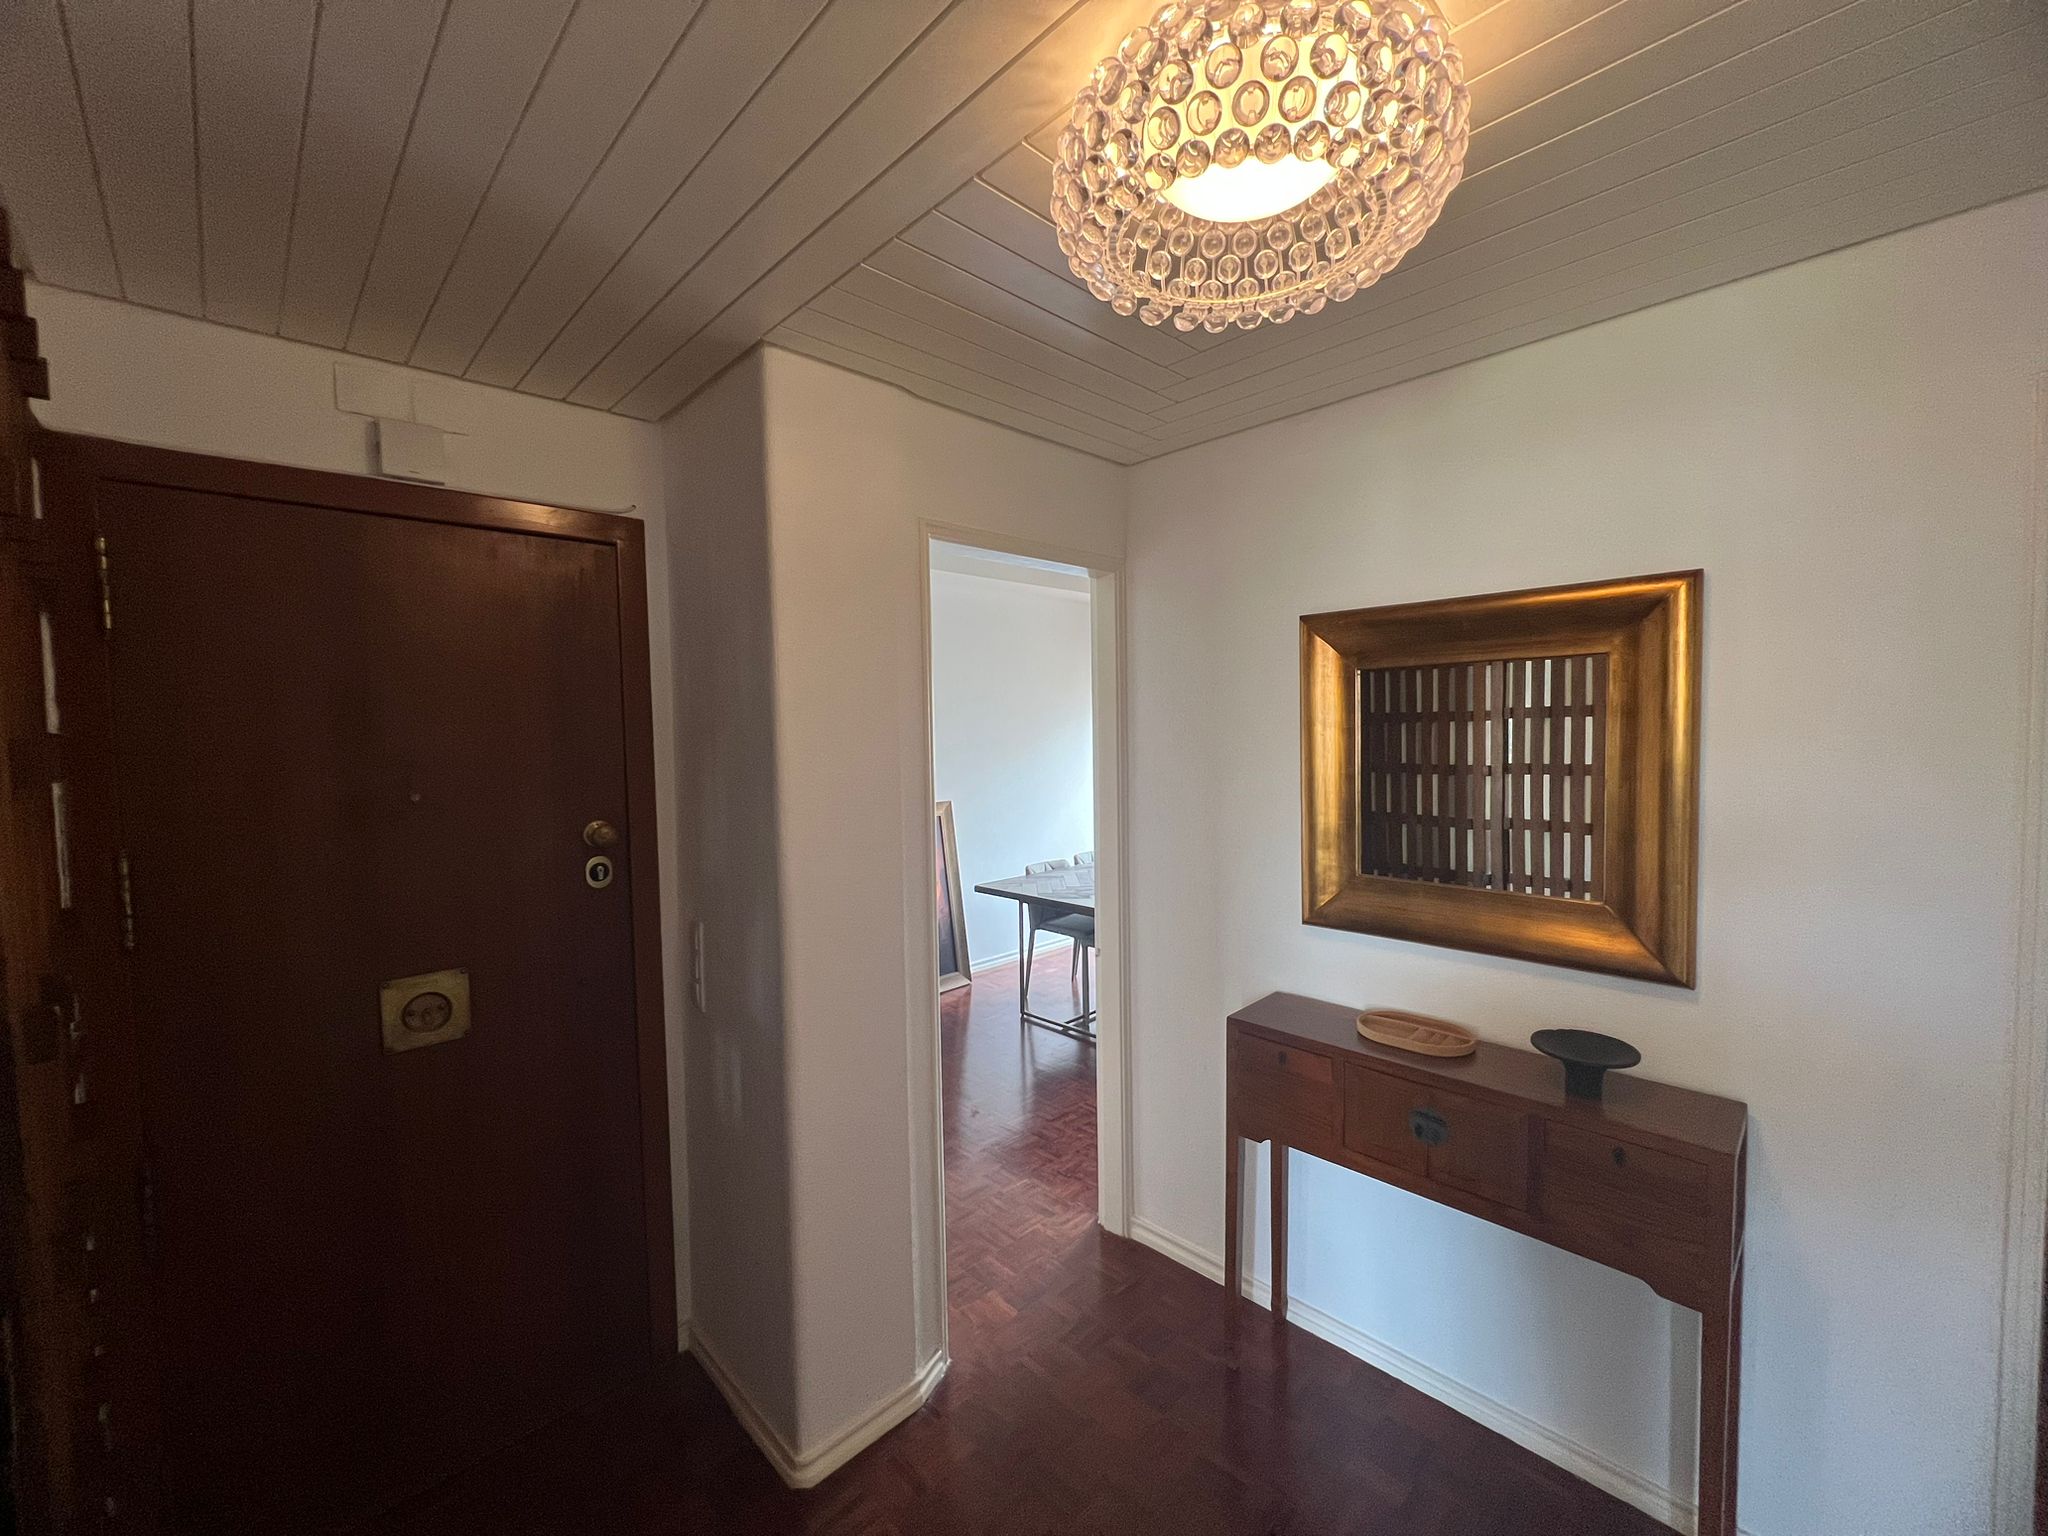 Apartment for rent in Lisbon - hallway